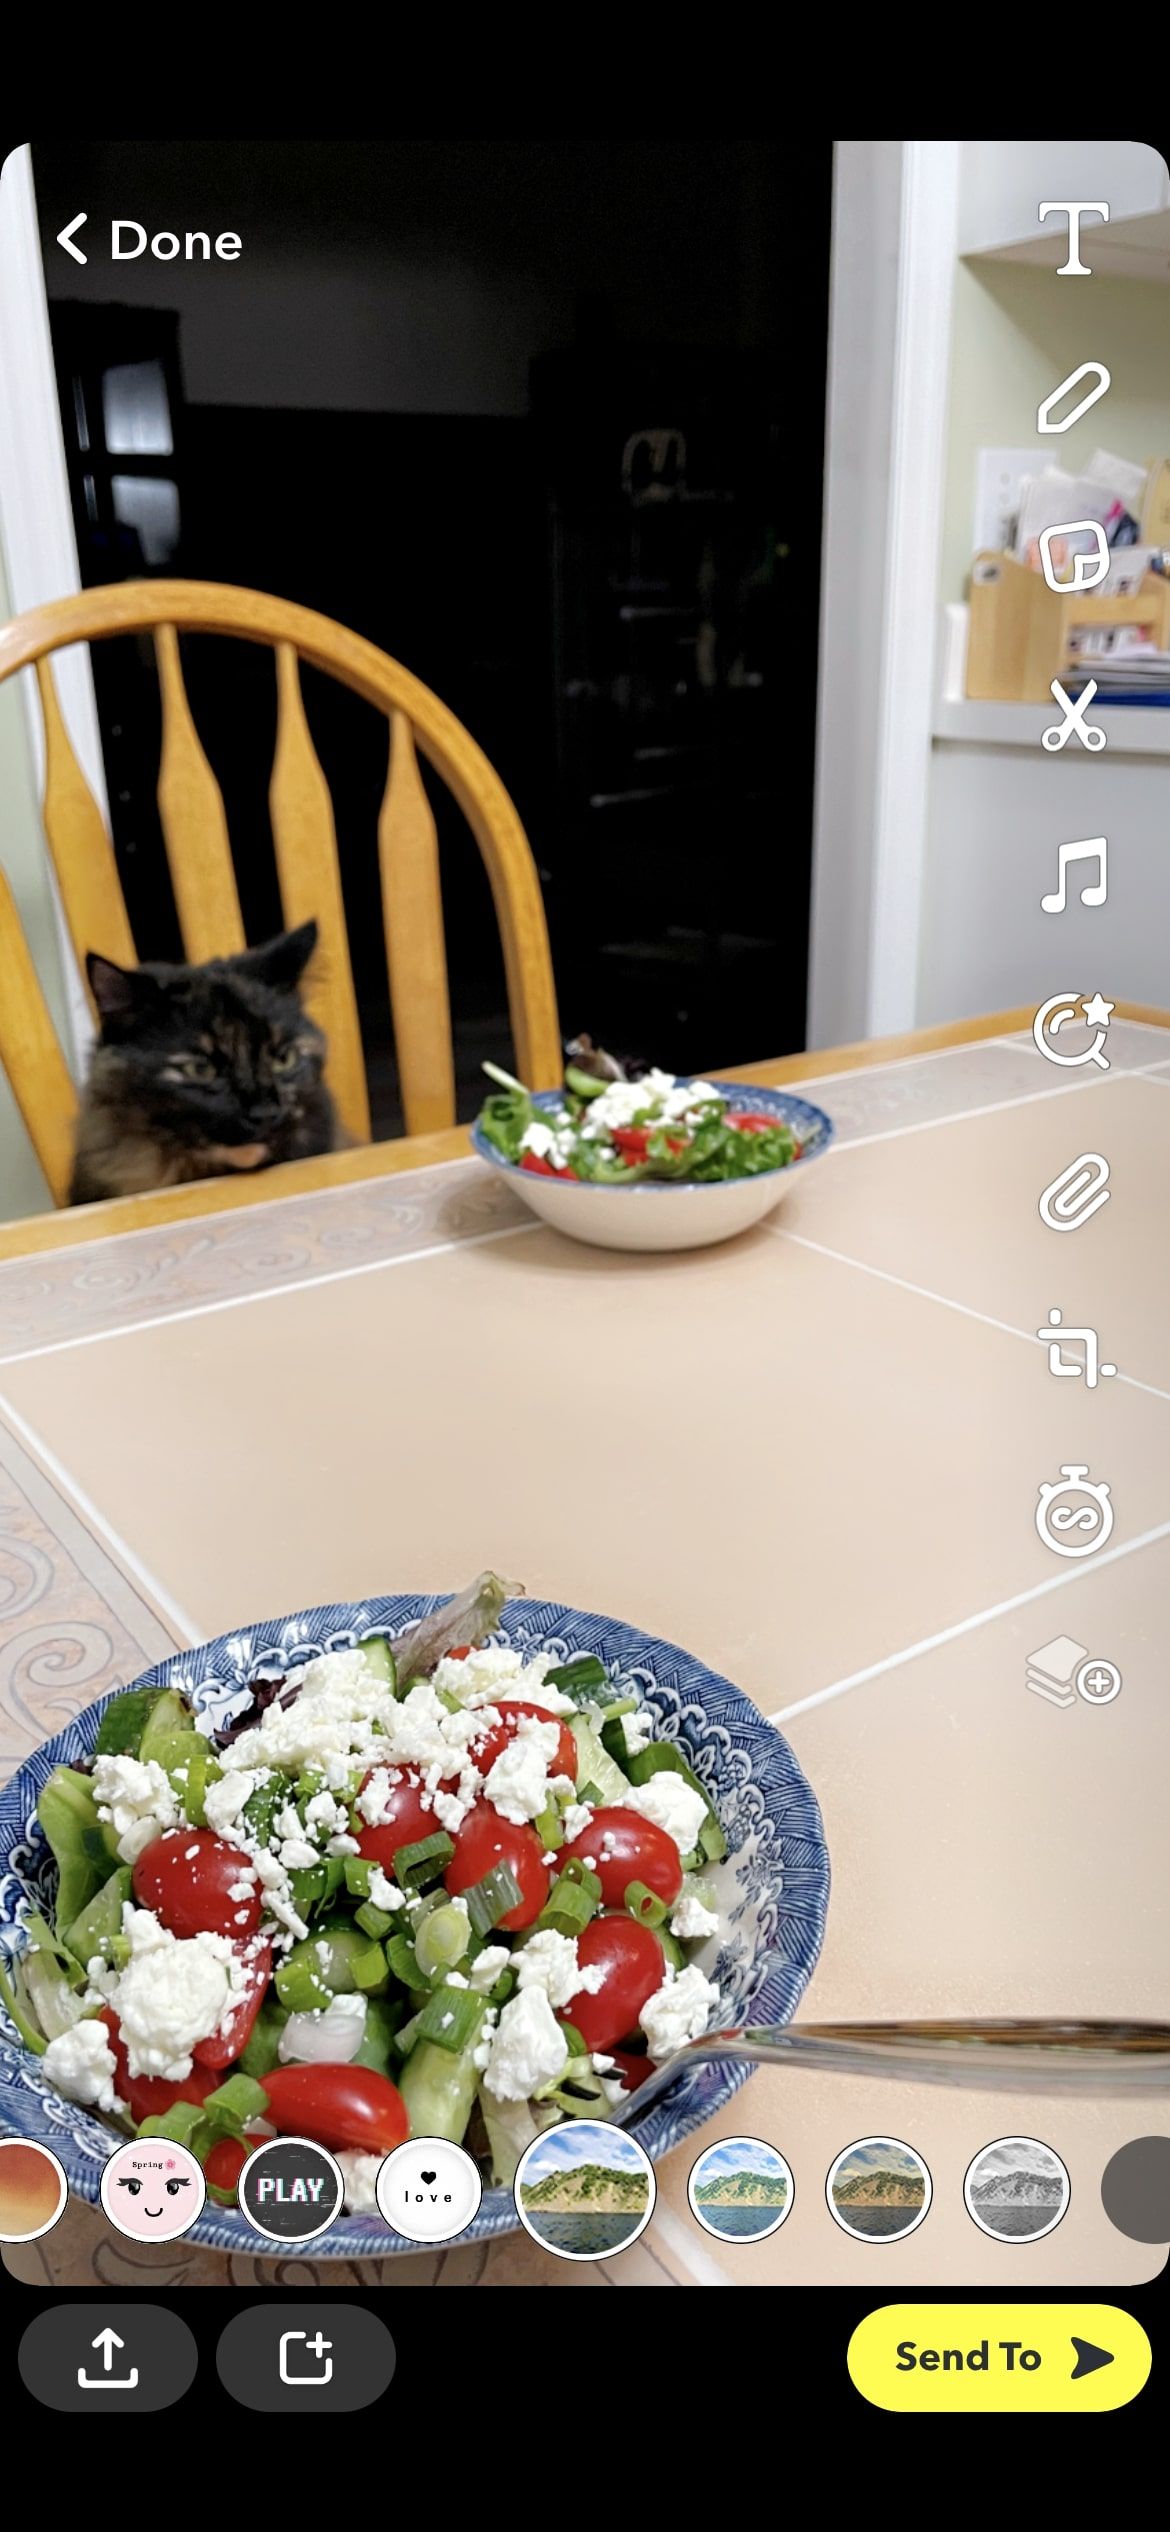 Screenshot of cat sitting at table within Snapchat choosing a filter